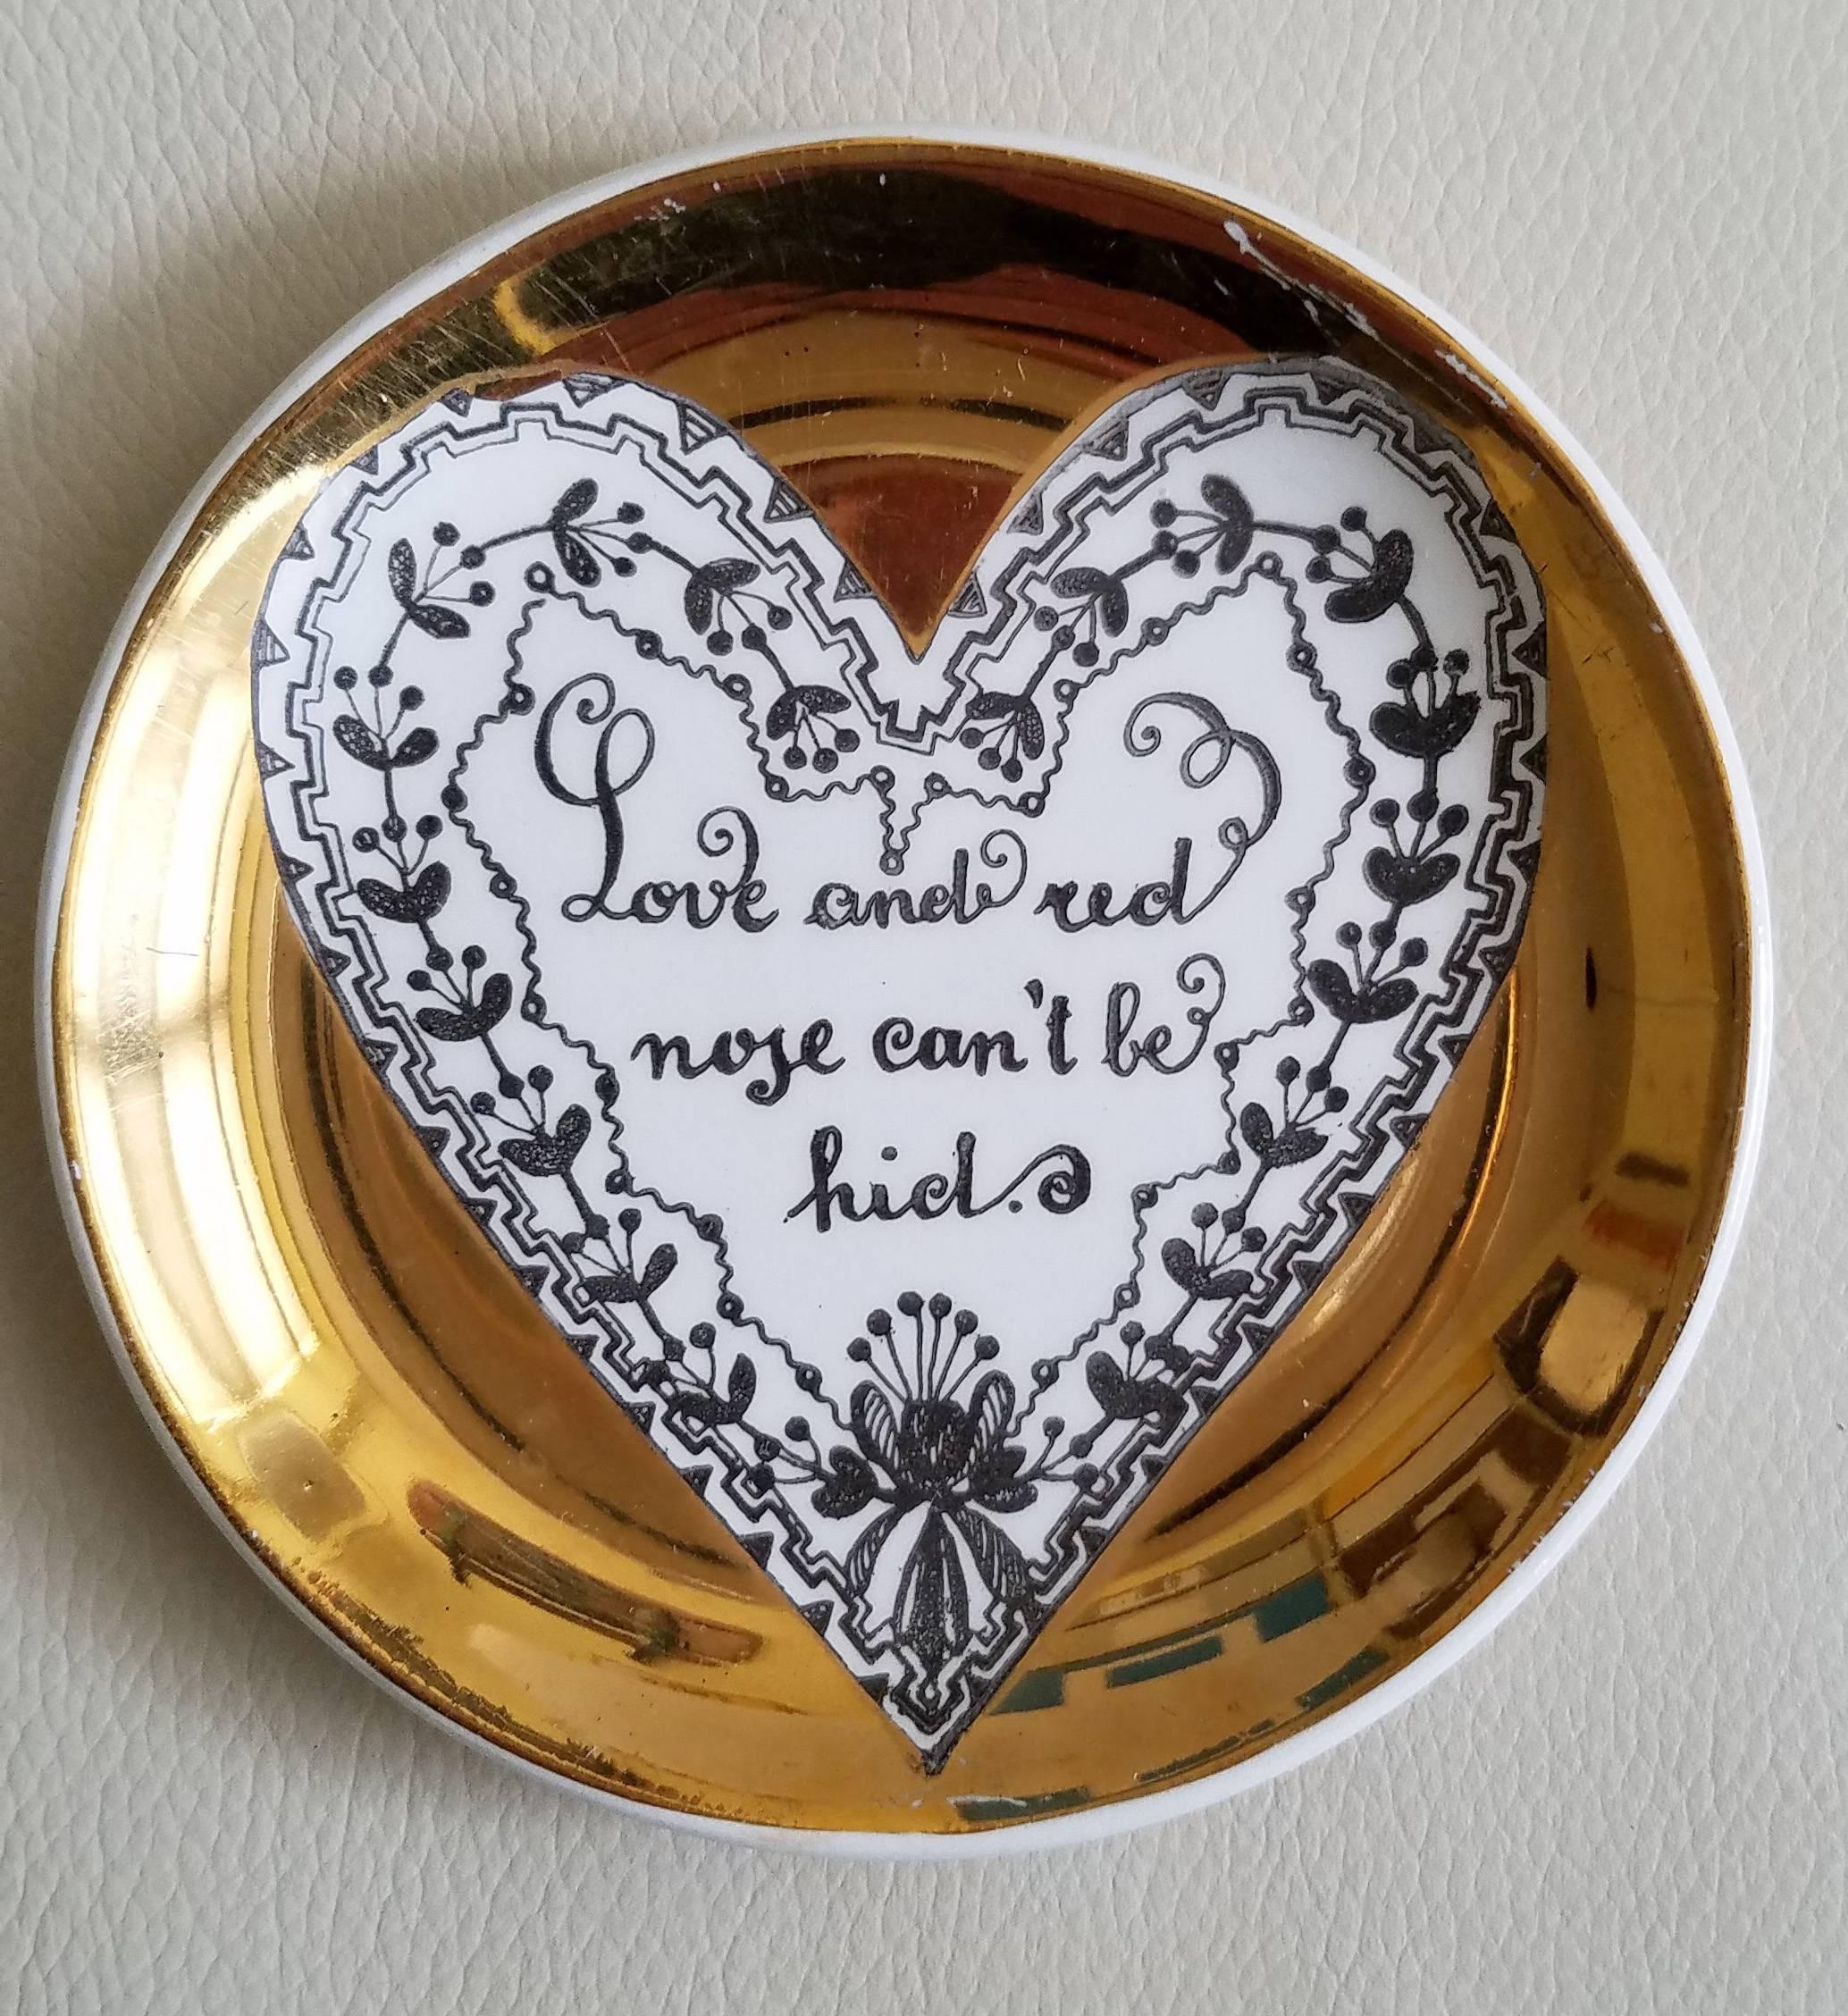 Mid-Century Modern Piero Fornasetti Porcelain Coaster Set with Love, Hearts and Saying